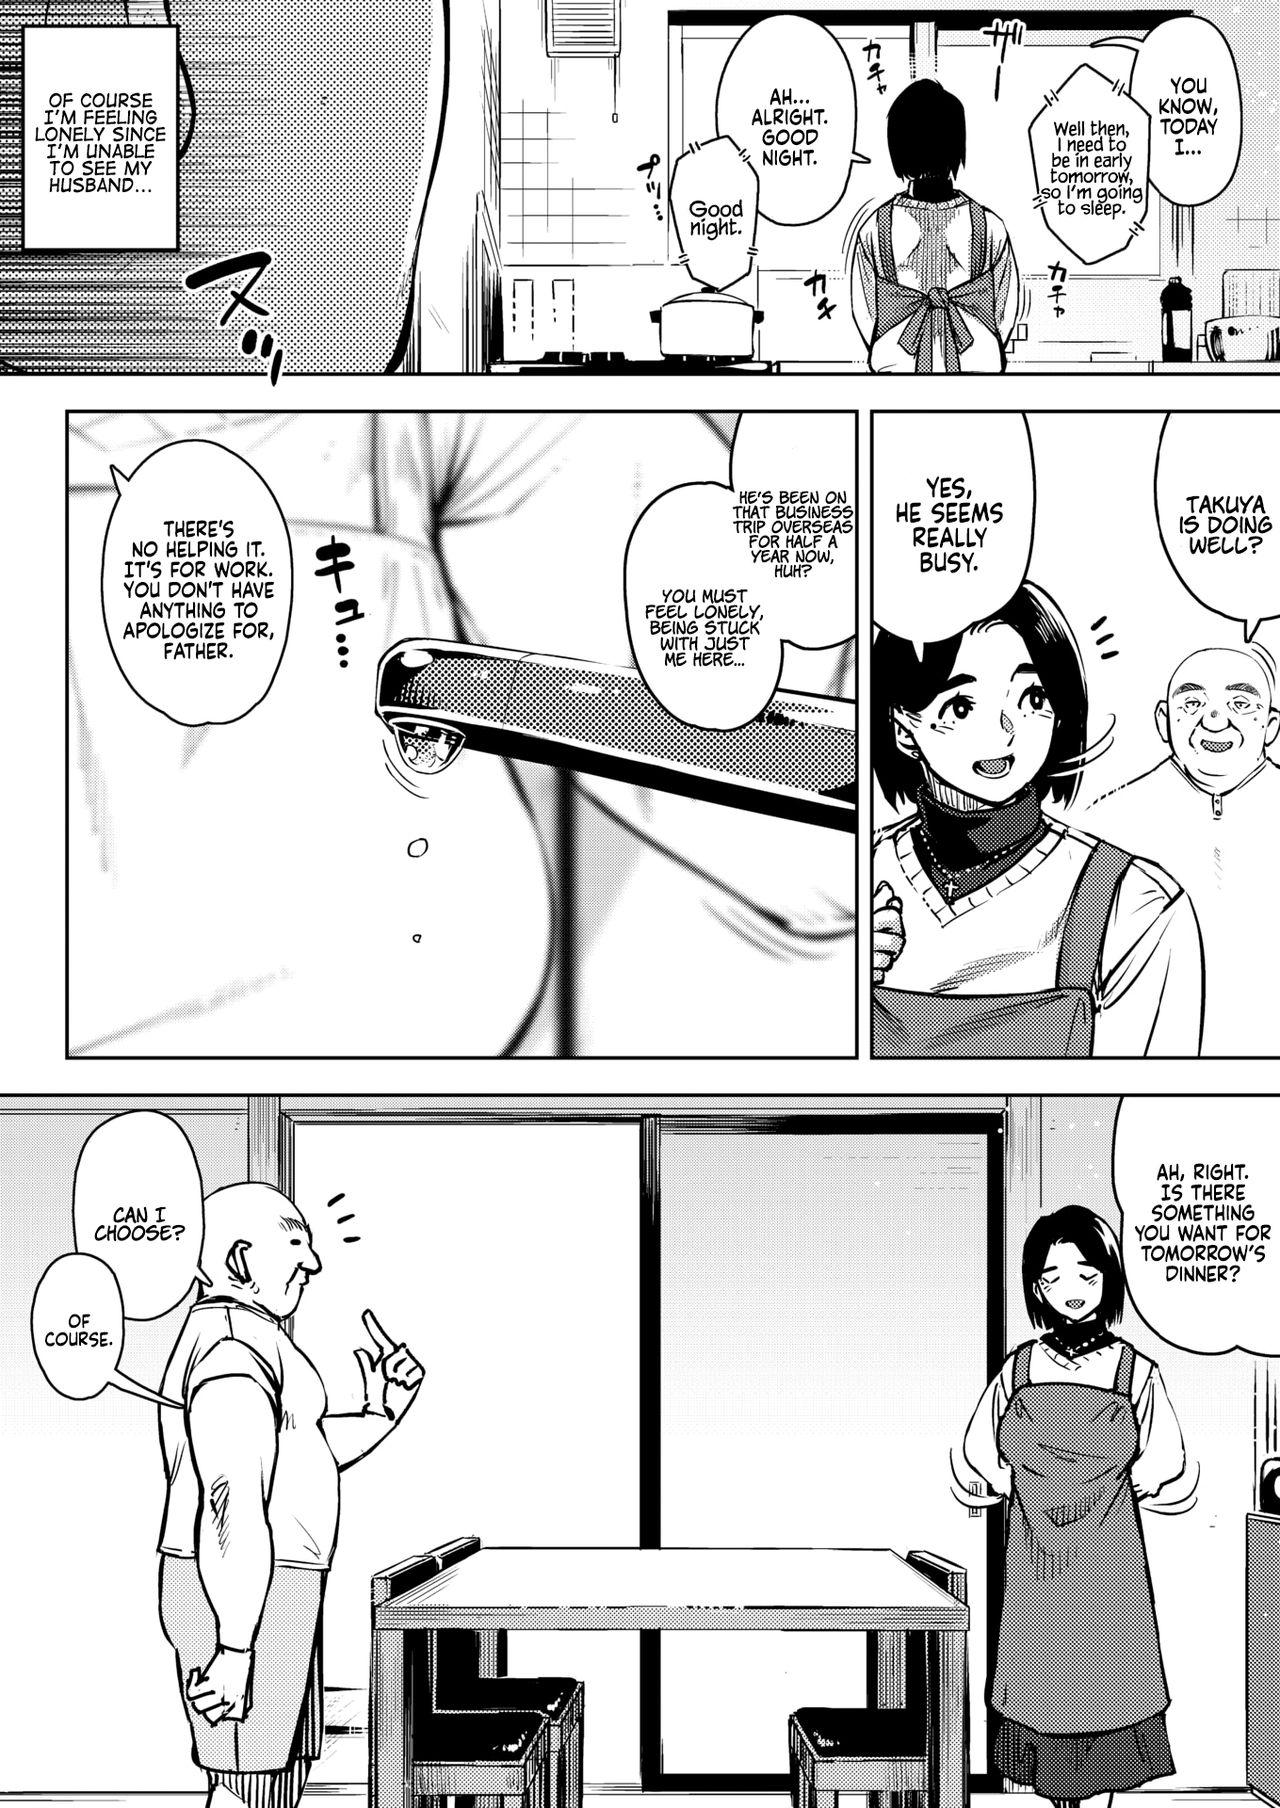 Fetish [Rocket Monkey] Gifu to... Zenpen | With My Father-in-Law... First Part (COMIC HOTMiLK Koime Vol. 27) [English] [Coffedrug] [Digital] Penis - Page 2